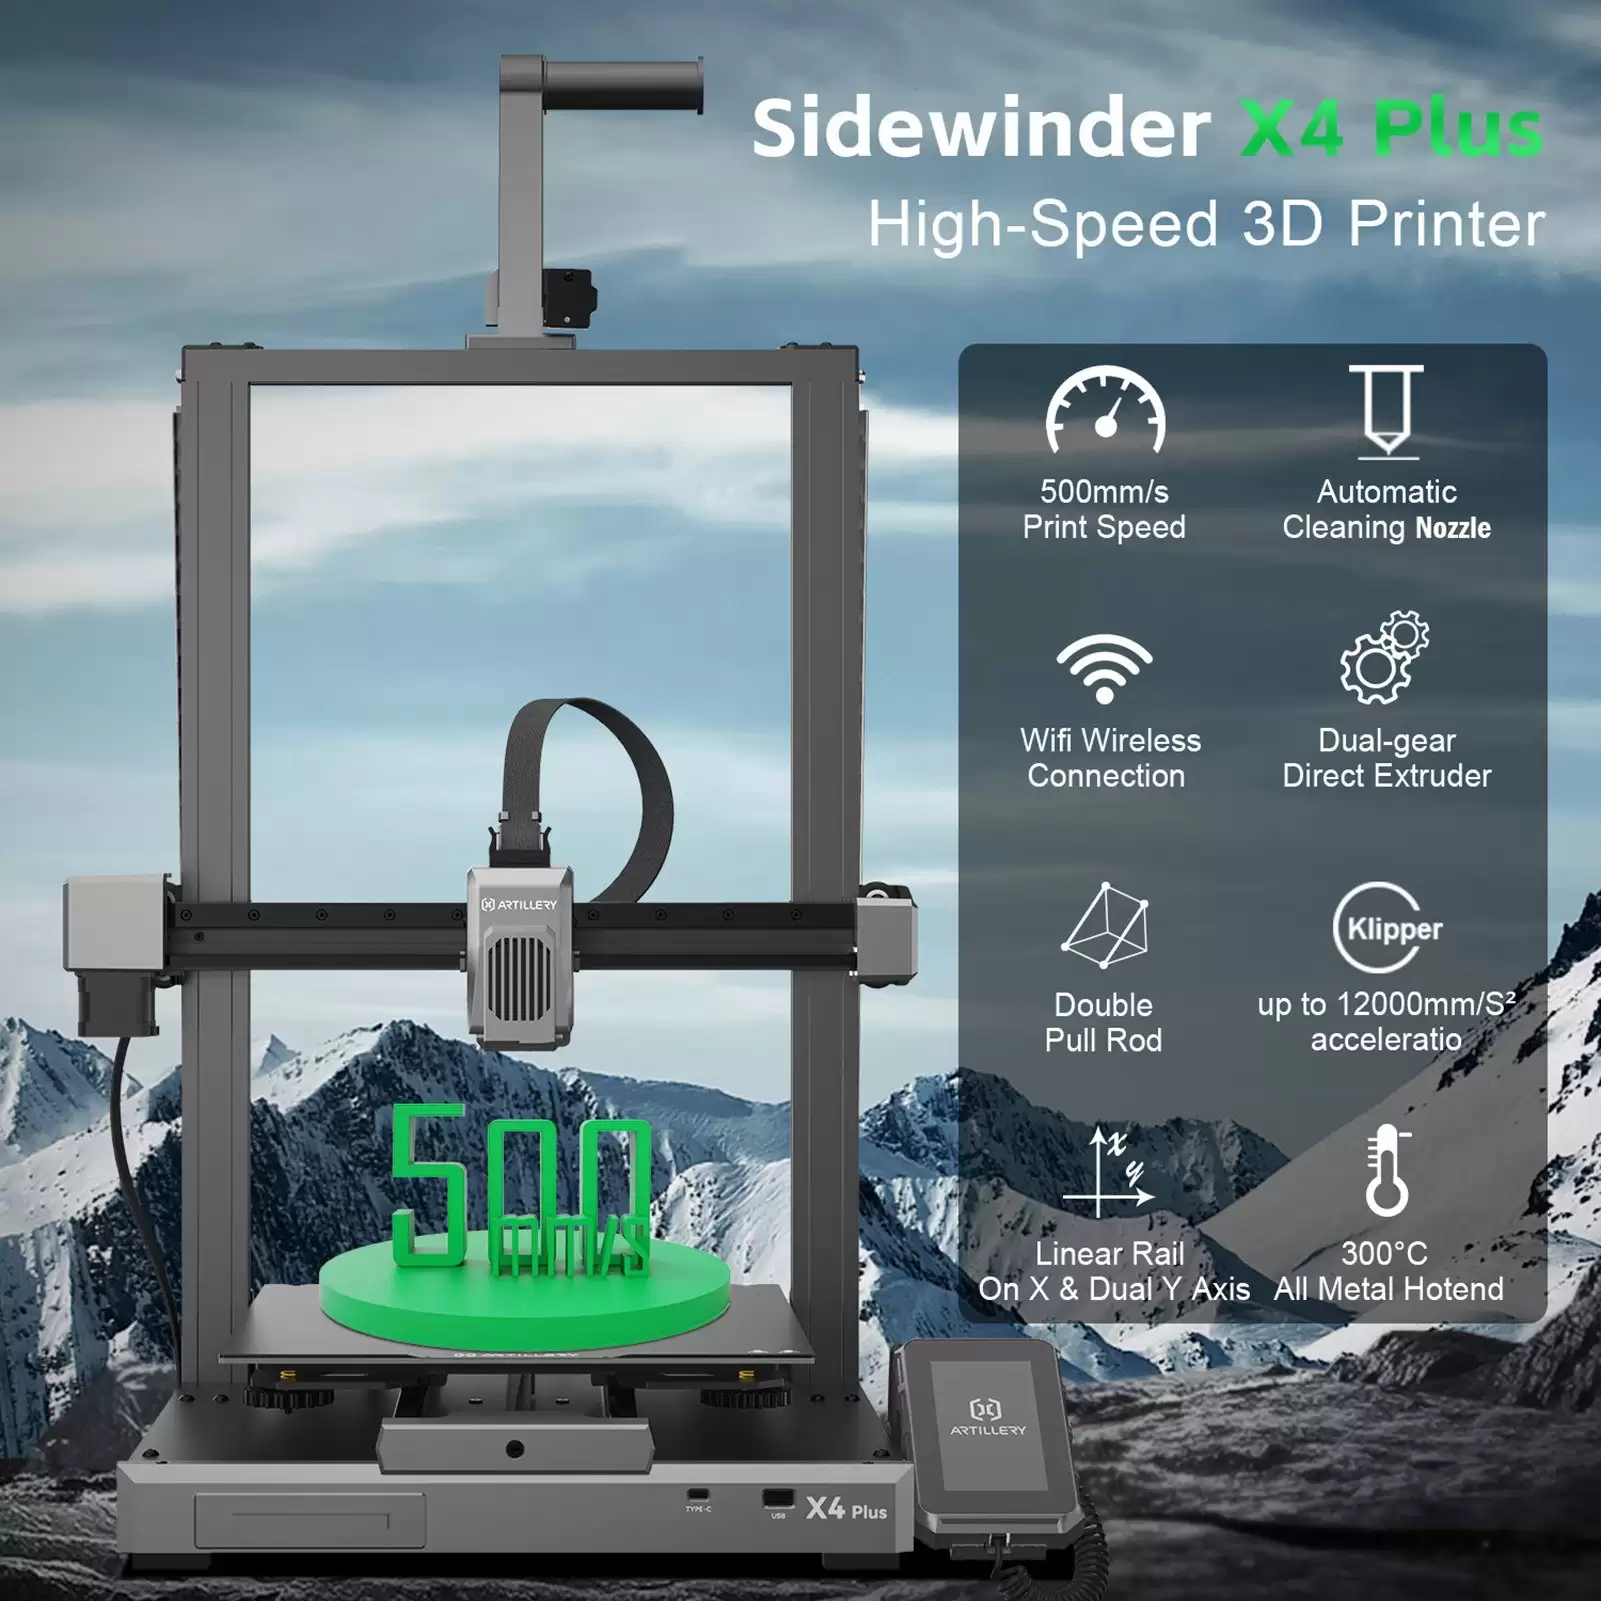 Pay Only $409 For Artillery Sidewinder X4 Plus 500mm/S High Speed Fdm 3d Printer With This Discount Coupon At Cafago